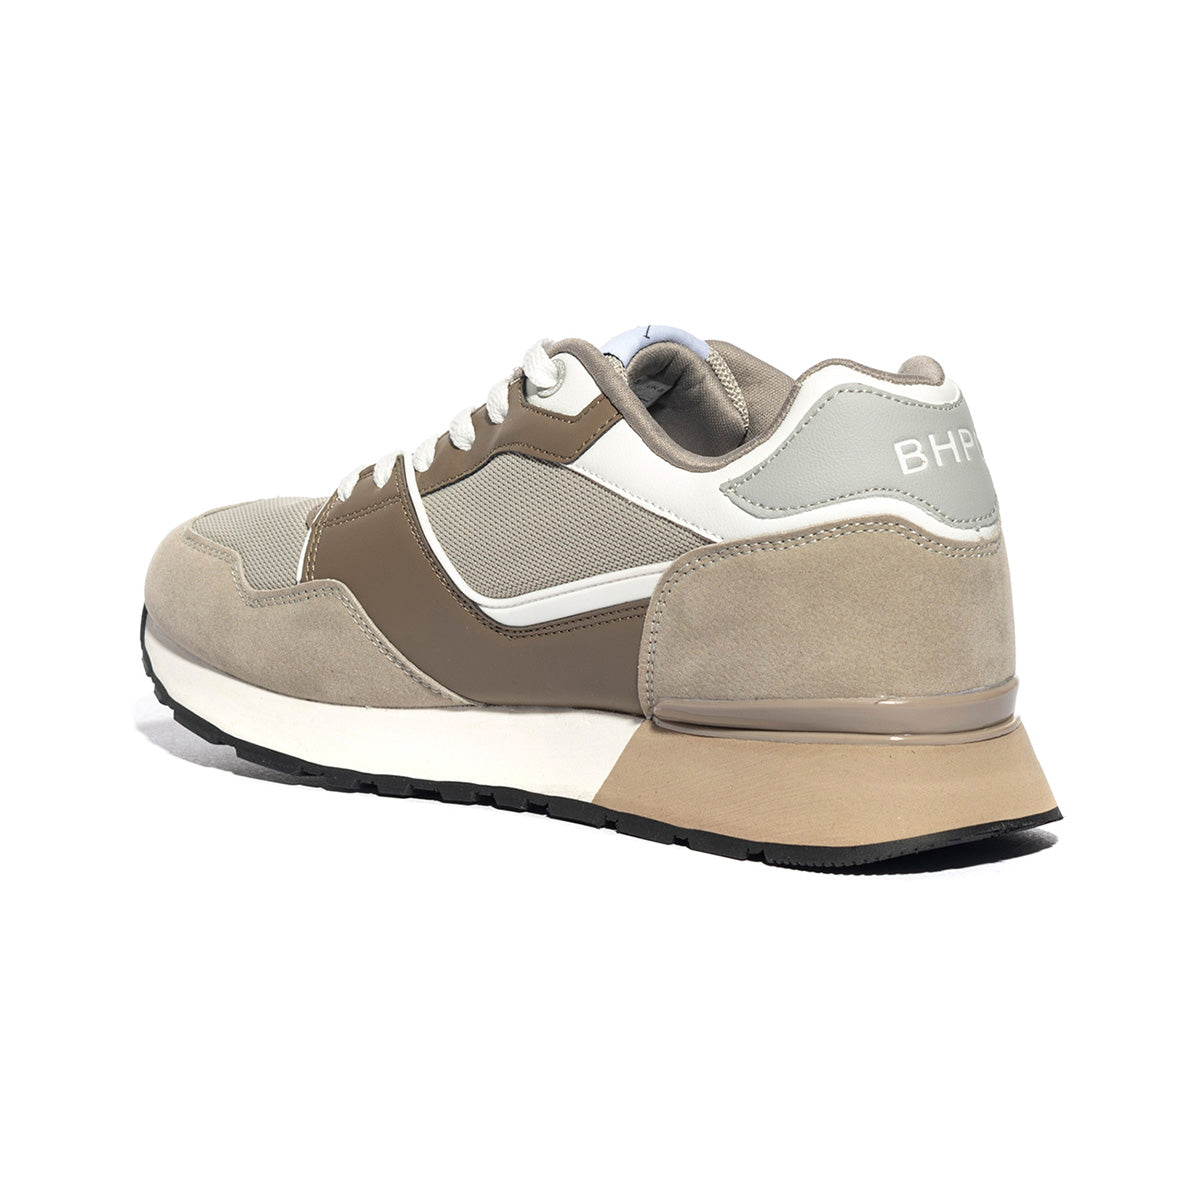 Sneakers Beverly Hills Polo Club Hm6742 Beige